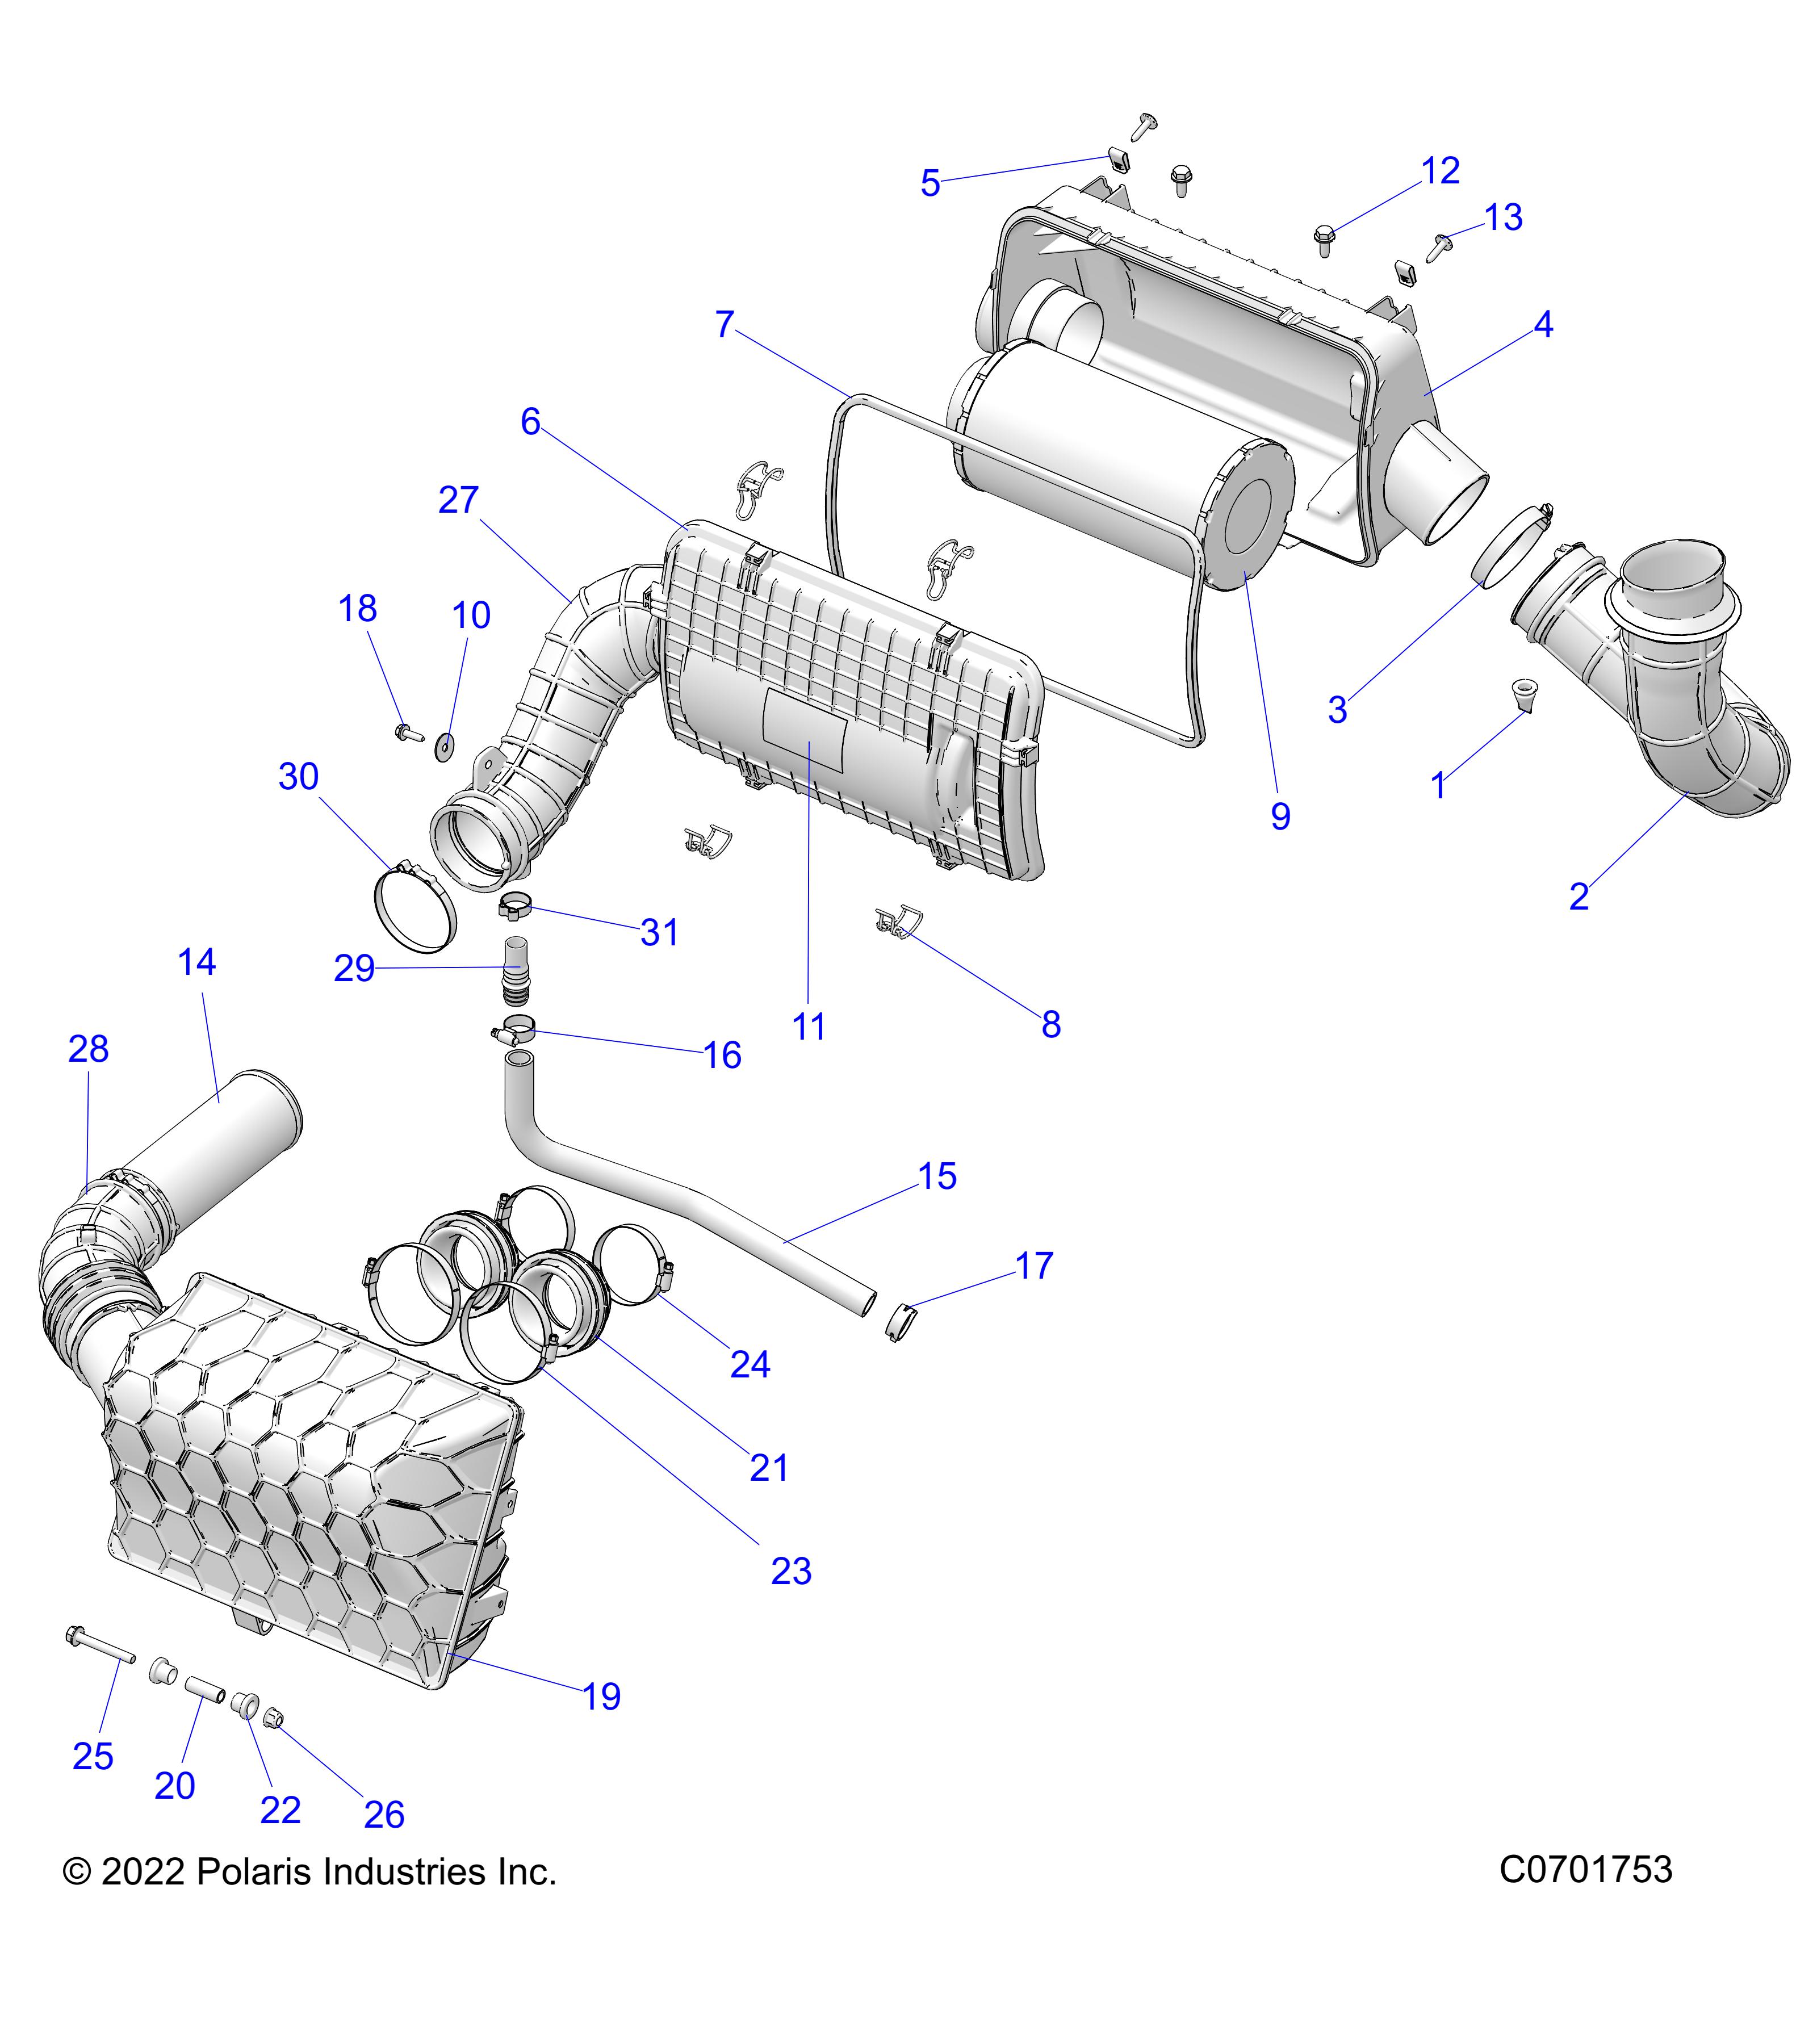 Part Number : 1240770 INTAKE DUCT ASSEMBLY